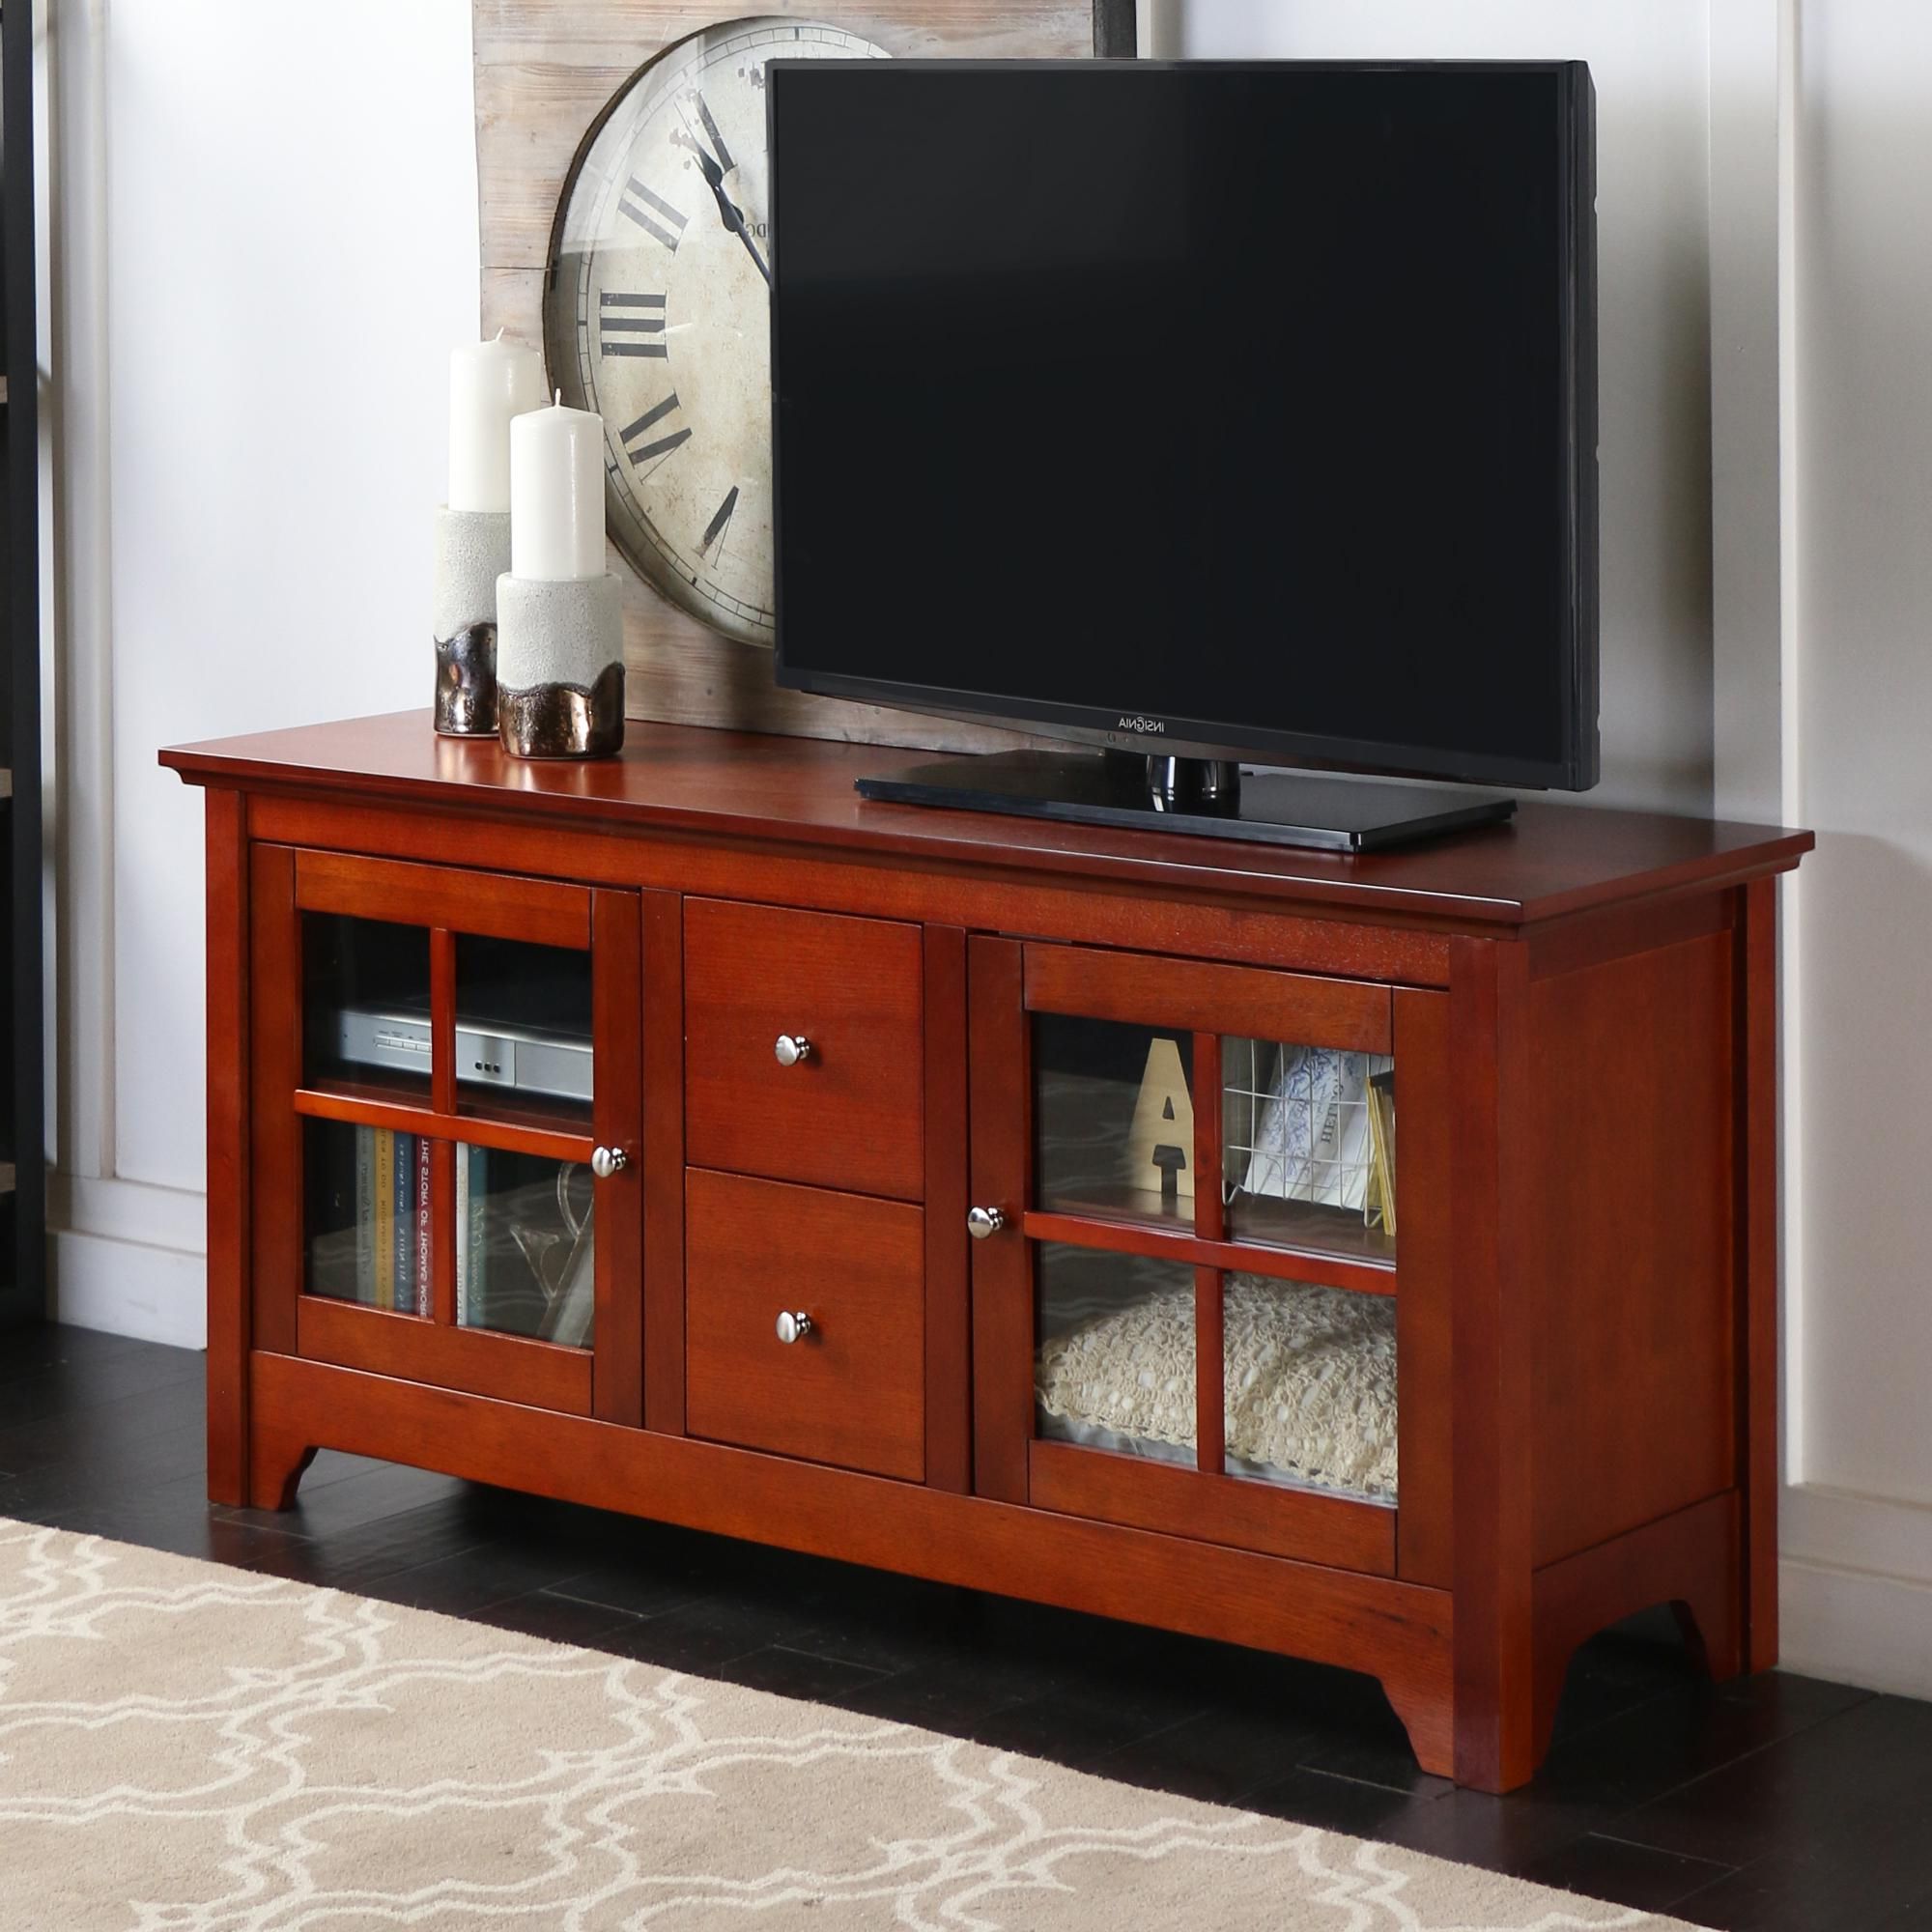 Solid Oak Tv Stands Pertaining To Most Recent Amazon: Walker Edison 53" Wood Tv Stand Console With Storage (View 12 of 20)